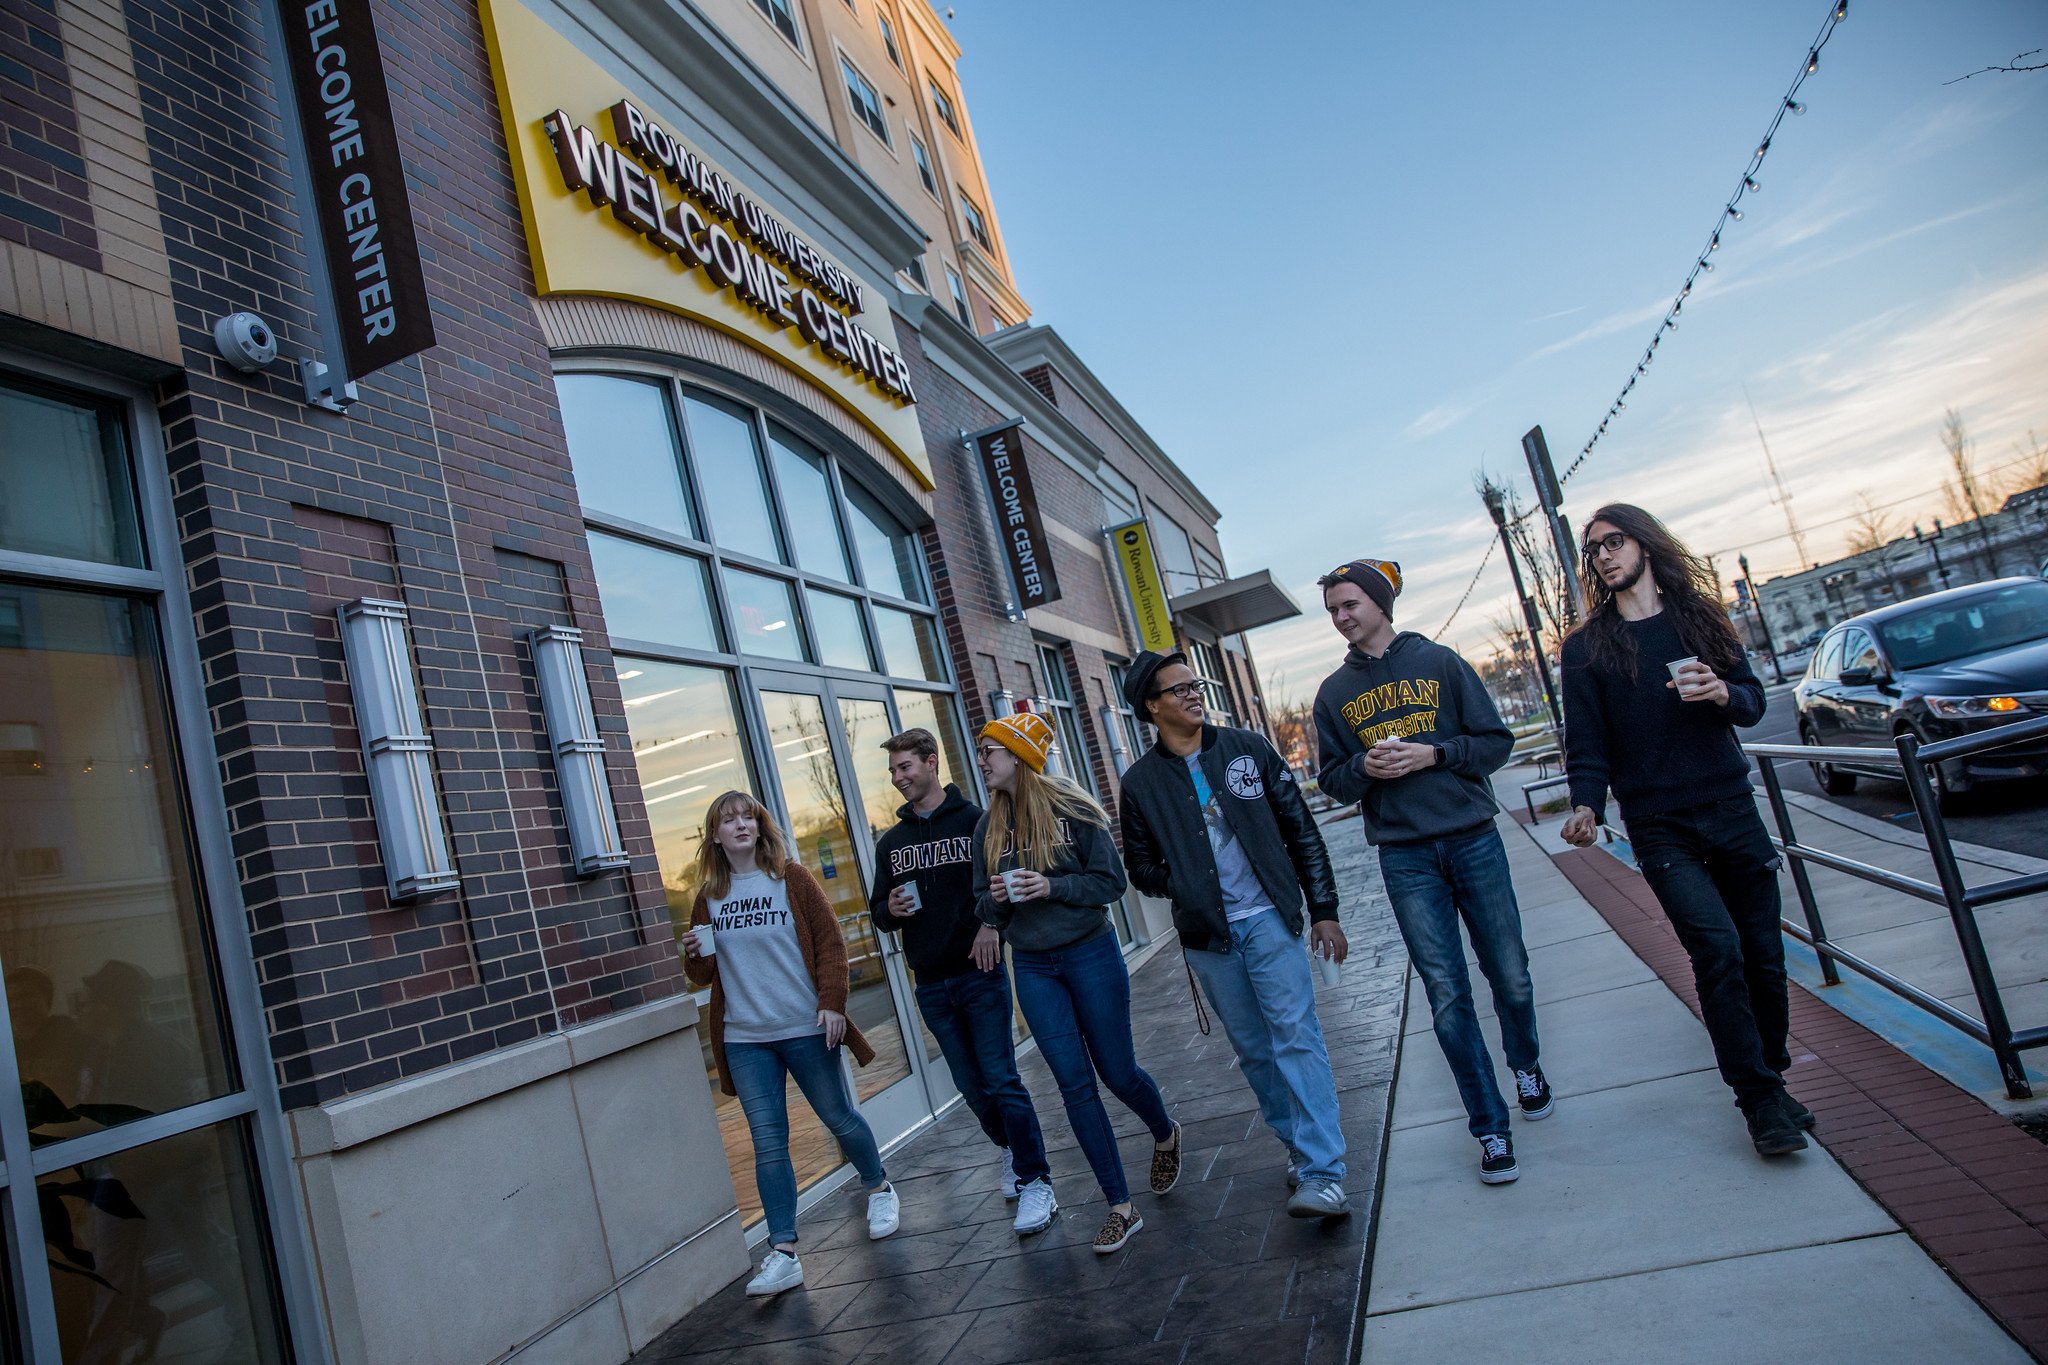 Rowan University students walking past the Welcome Center in winter.